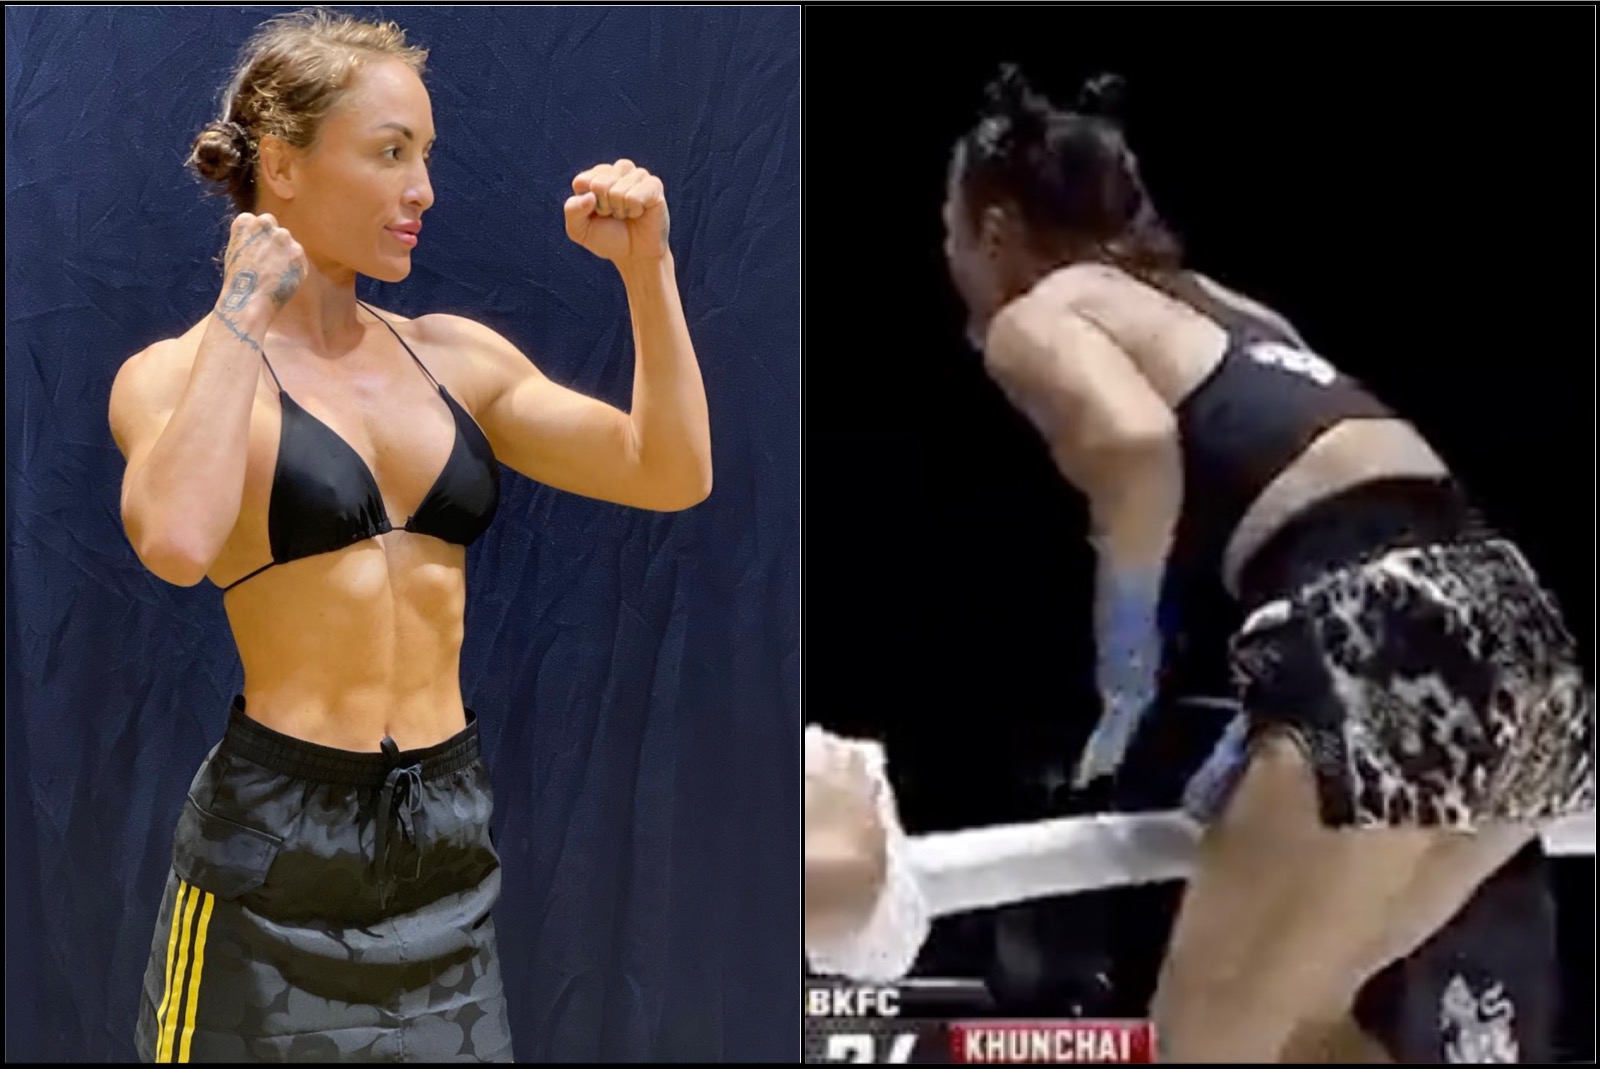 Watch Bkfc Fighter Tai Emery Says Flash Her Boobs At The Crowd After Fight Says Her Onlyfans